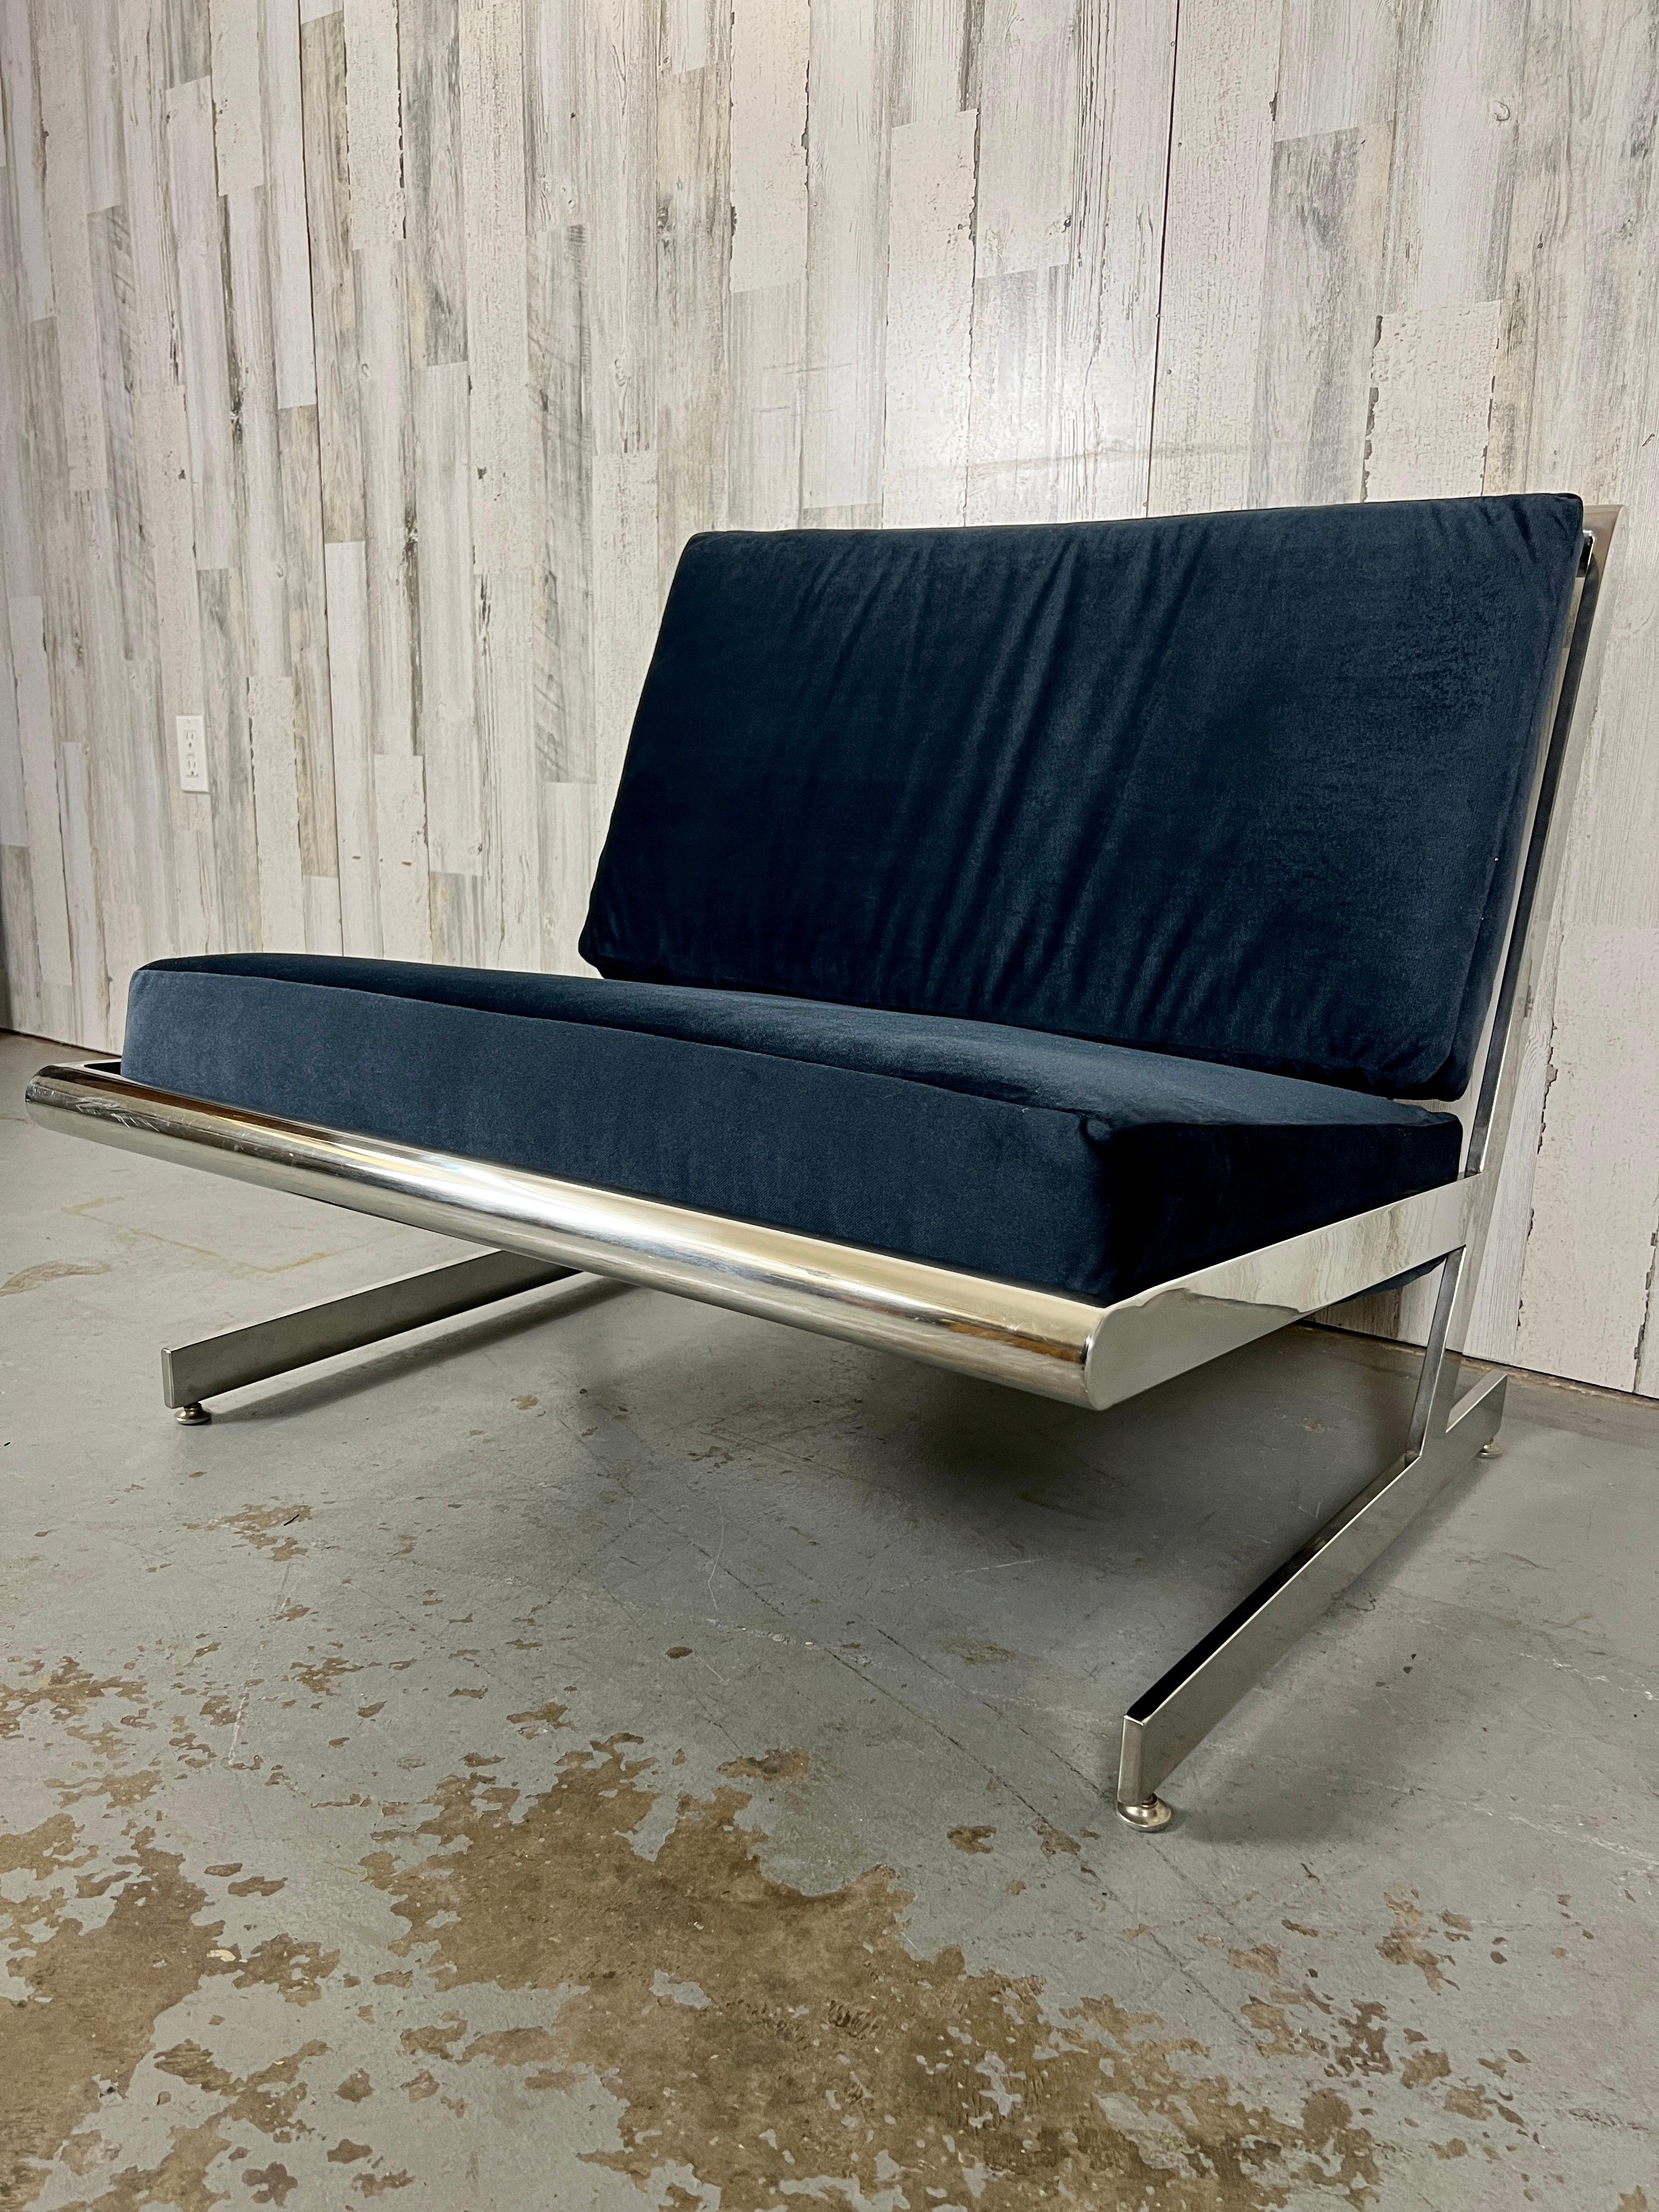 20th Century Stainless Steel Cantilevered Lounge Chair For Sale